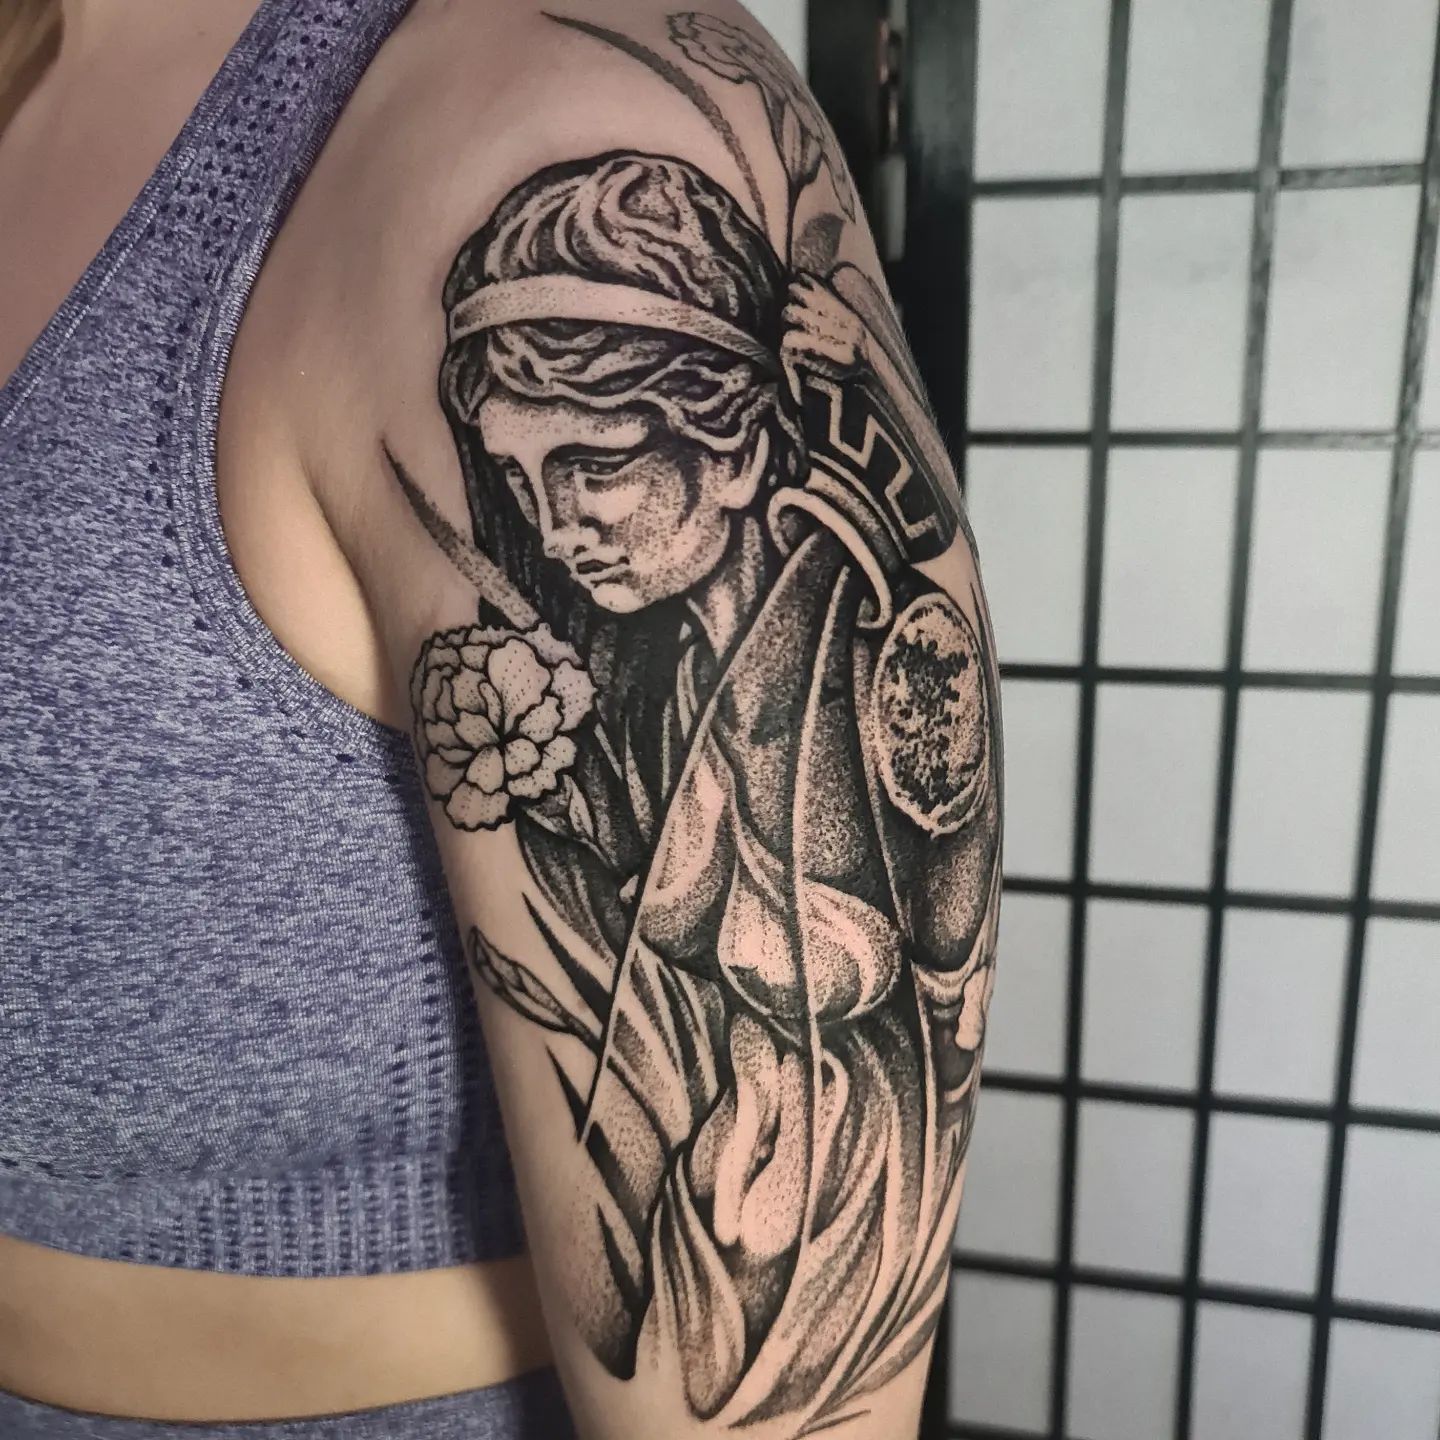 In early ages, women would grow their own herbs and some other things like water. To match this meaning with Aquarius, the tattoo above could be a meaningful one to get. Let's honor these women who are as hardworking as you are.